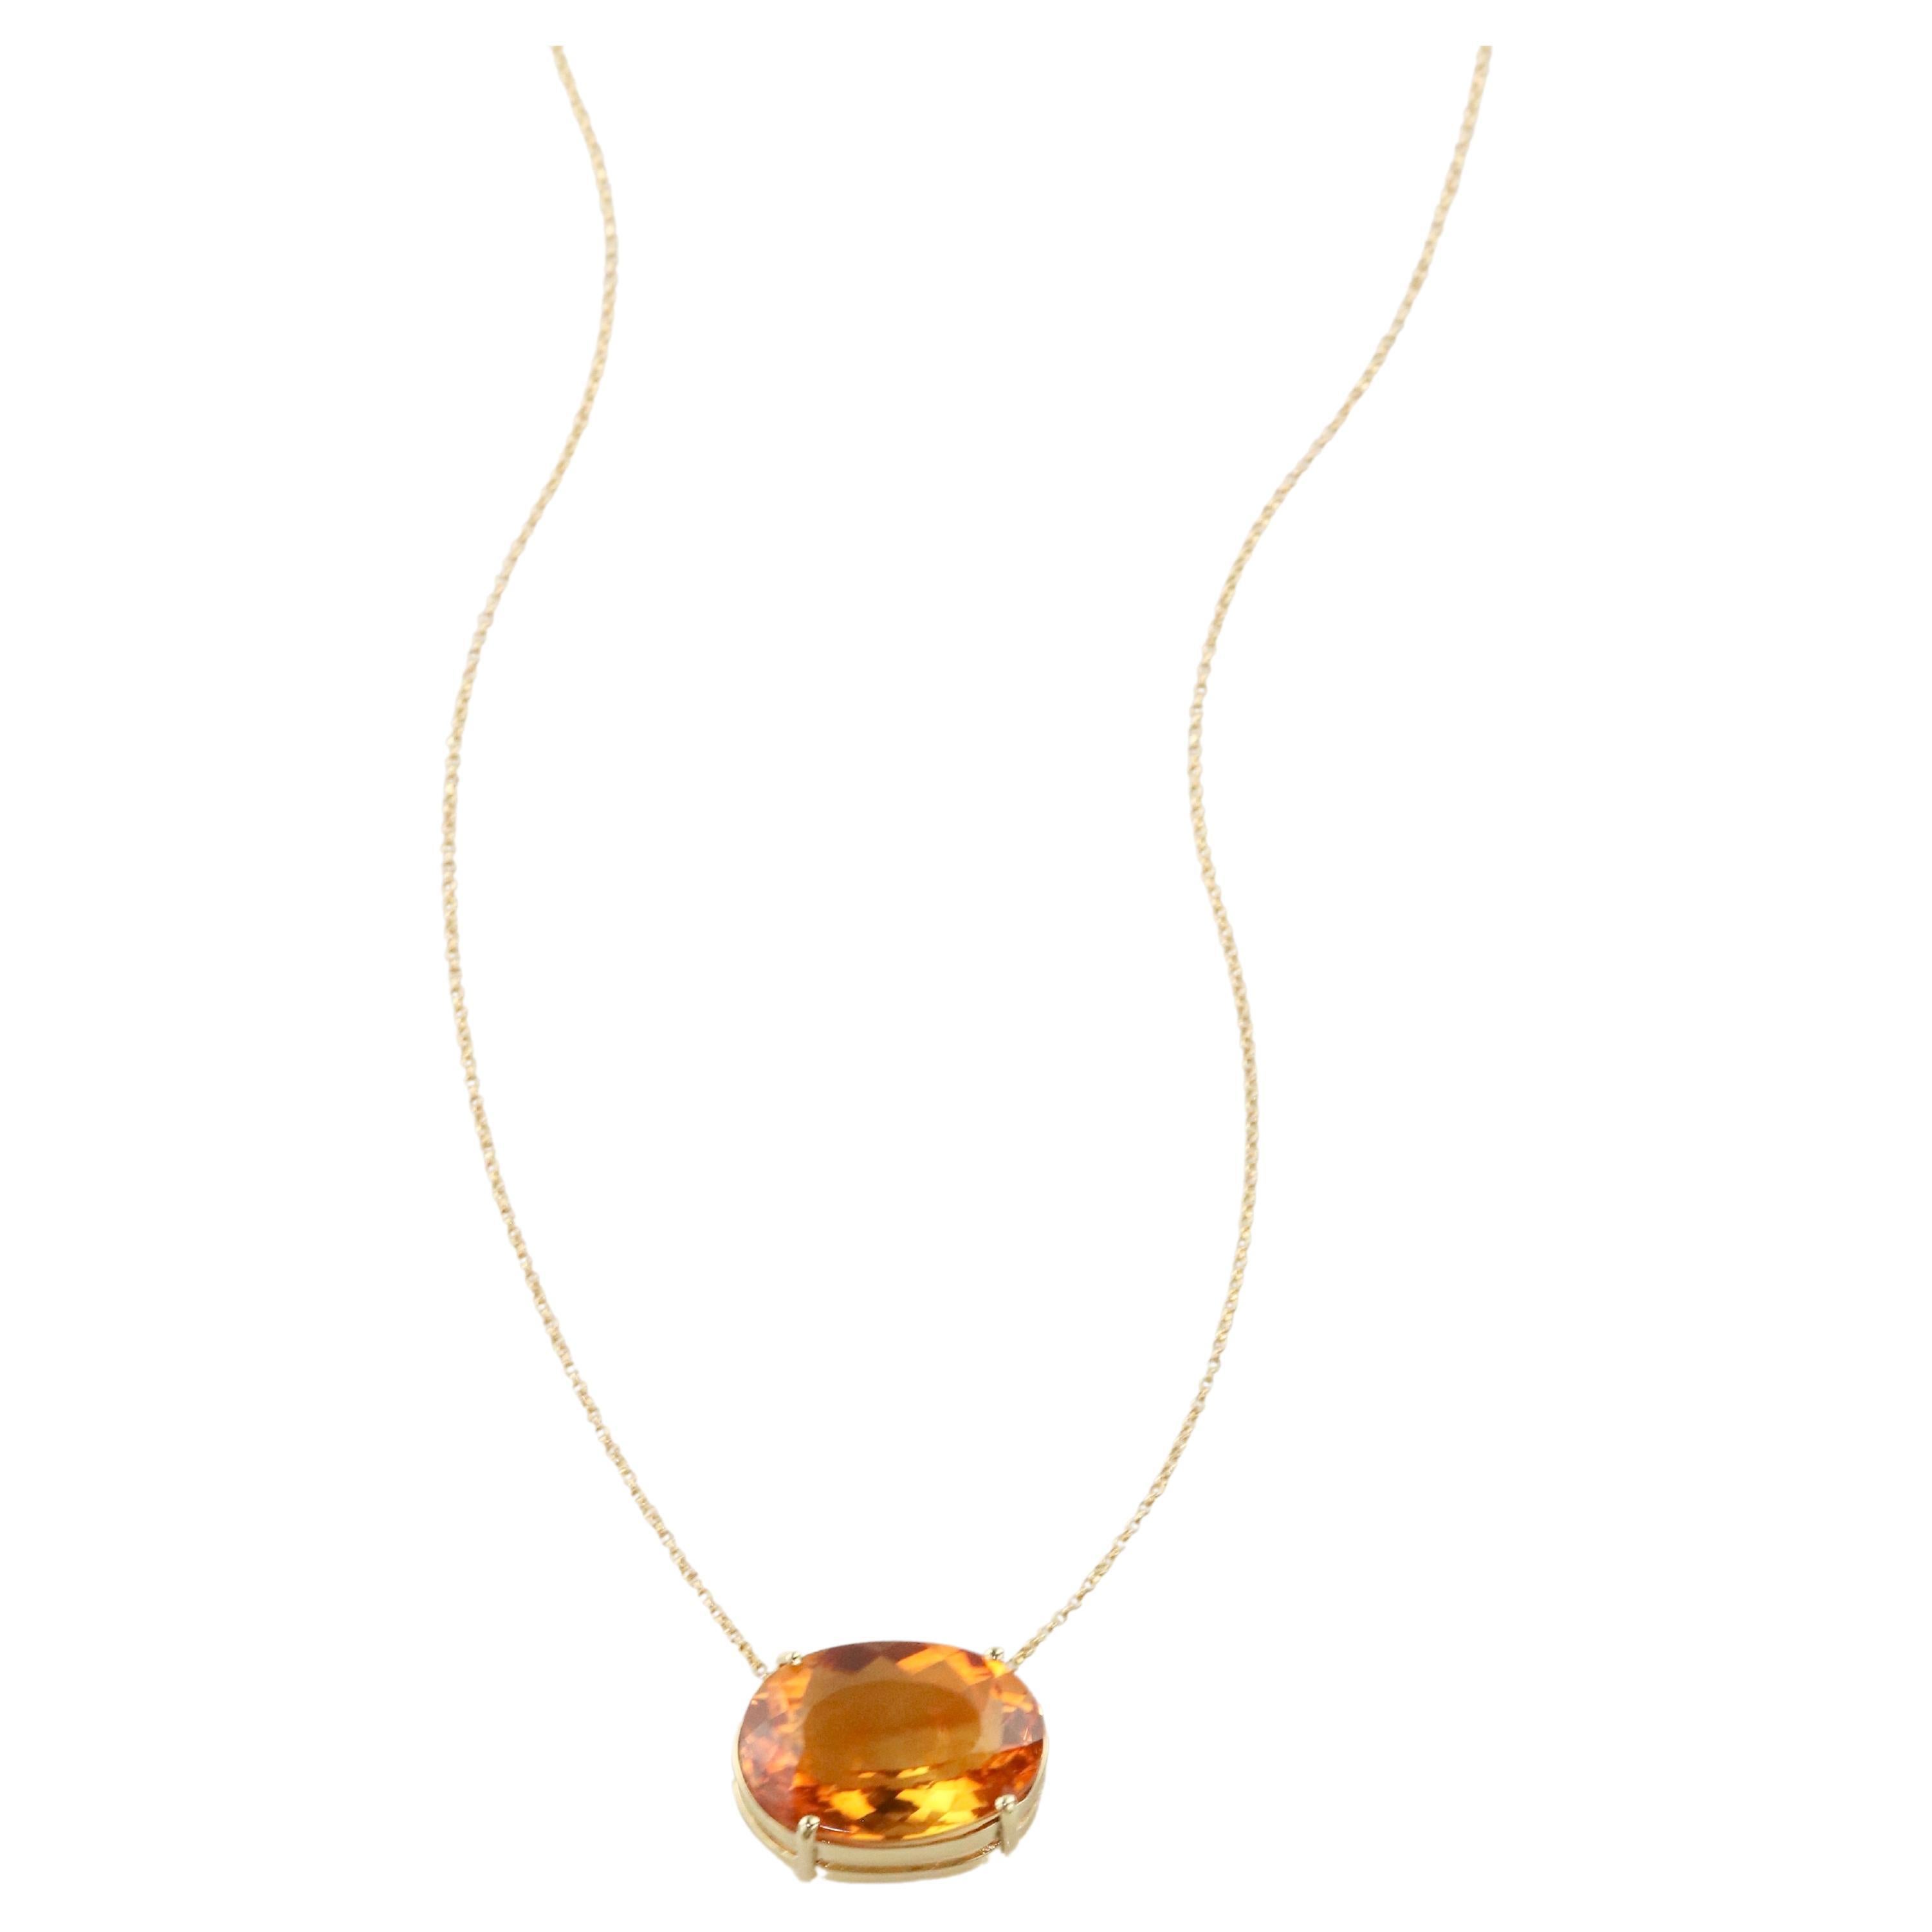 Citrine Necklace - 18K Yellow Gold 